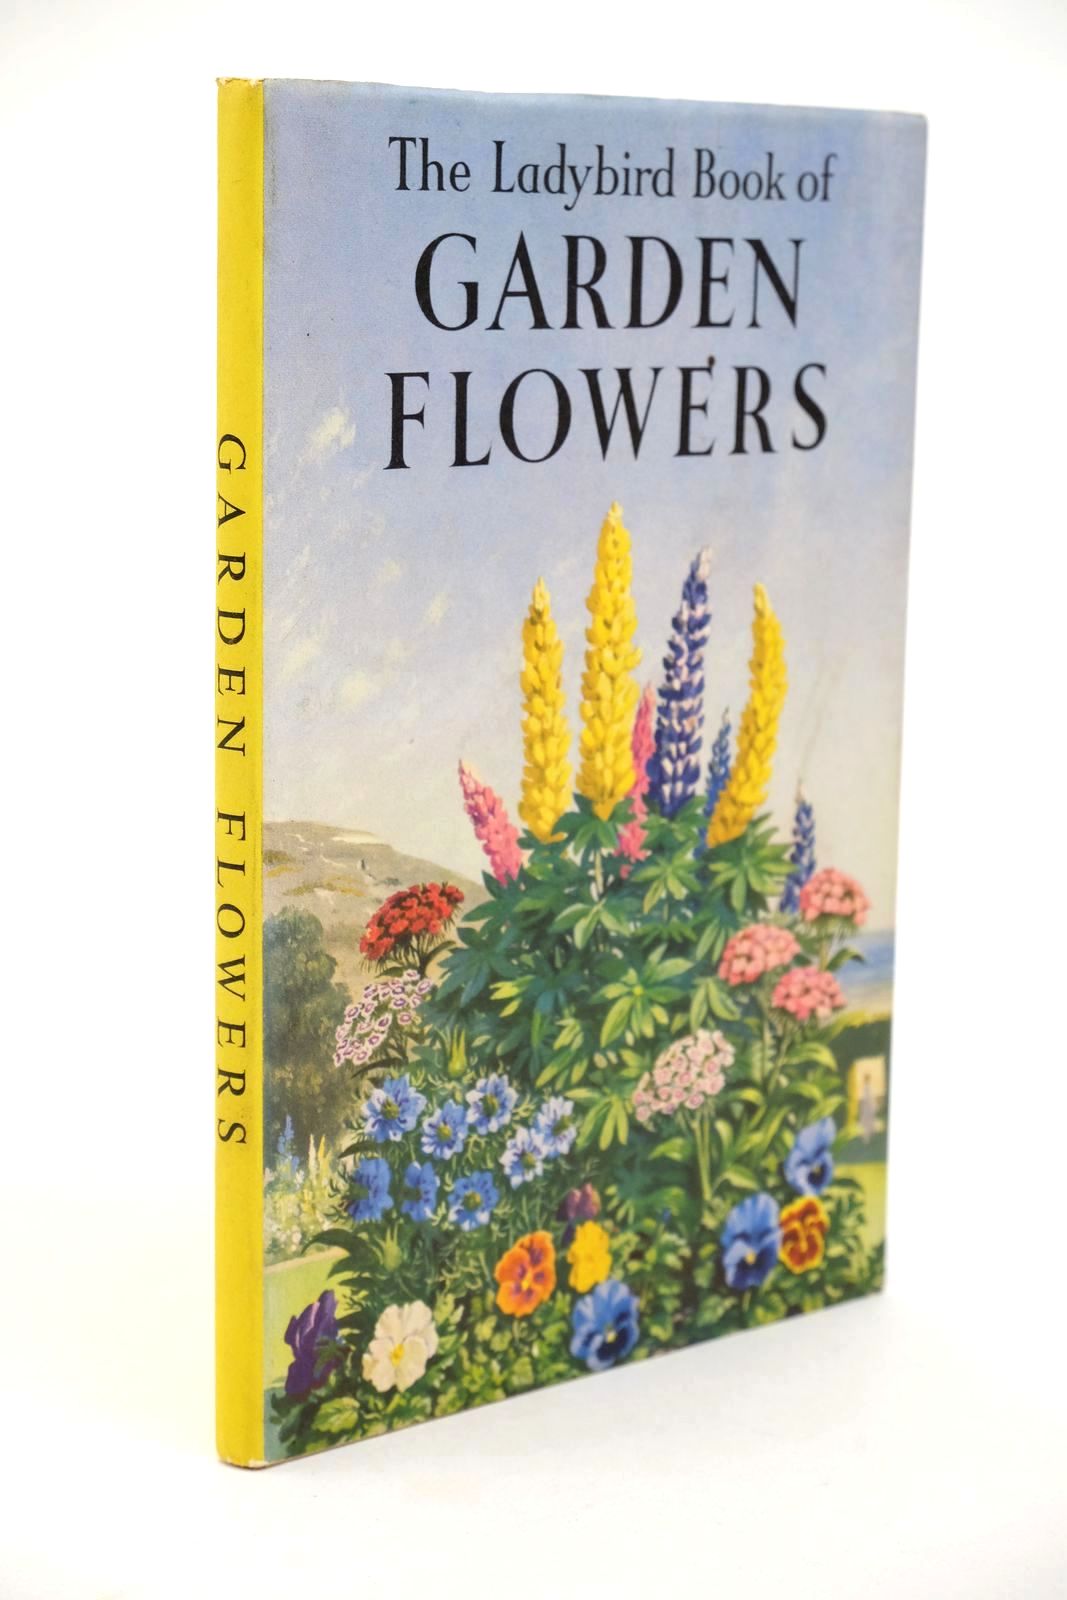 Photo of THE LADYBIRD BOOK OF GARDEN FLOWERS written by Vesey-Fitzgerald, Brian illustrated by Leigh-Pemberton, John published by Wills &amp; Hepworth Ltd. (STOCK CODE: 1323137)  for sale by Stella & Rose's Books